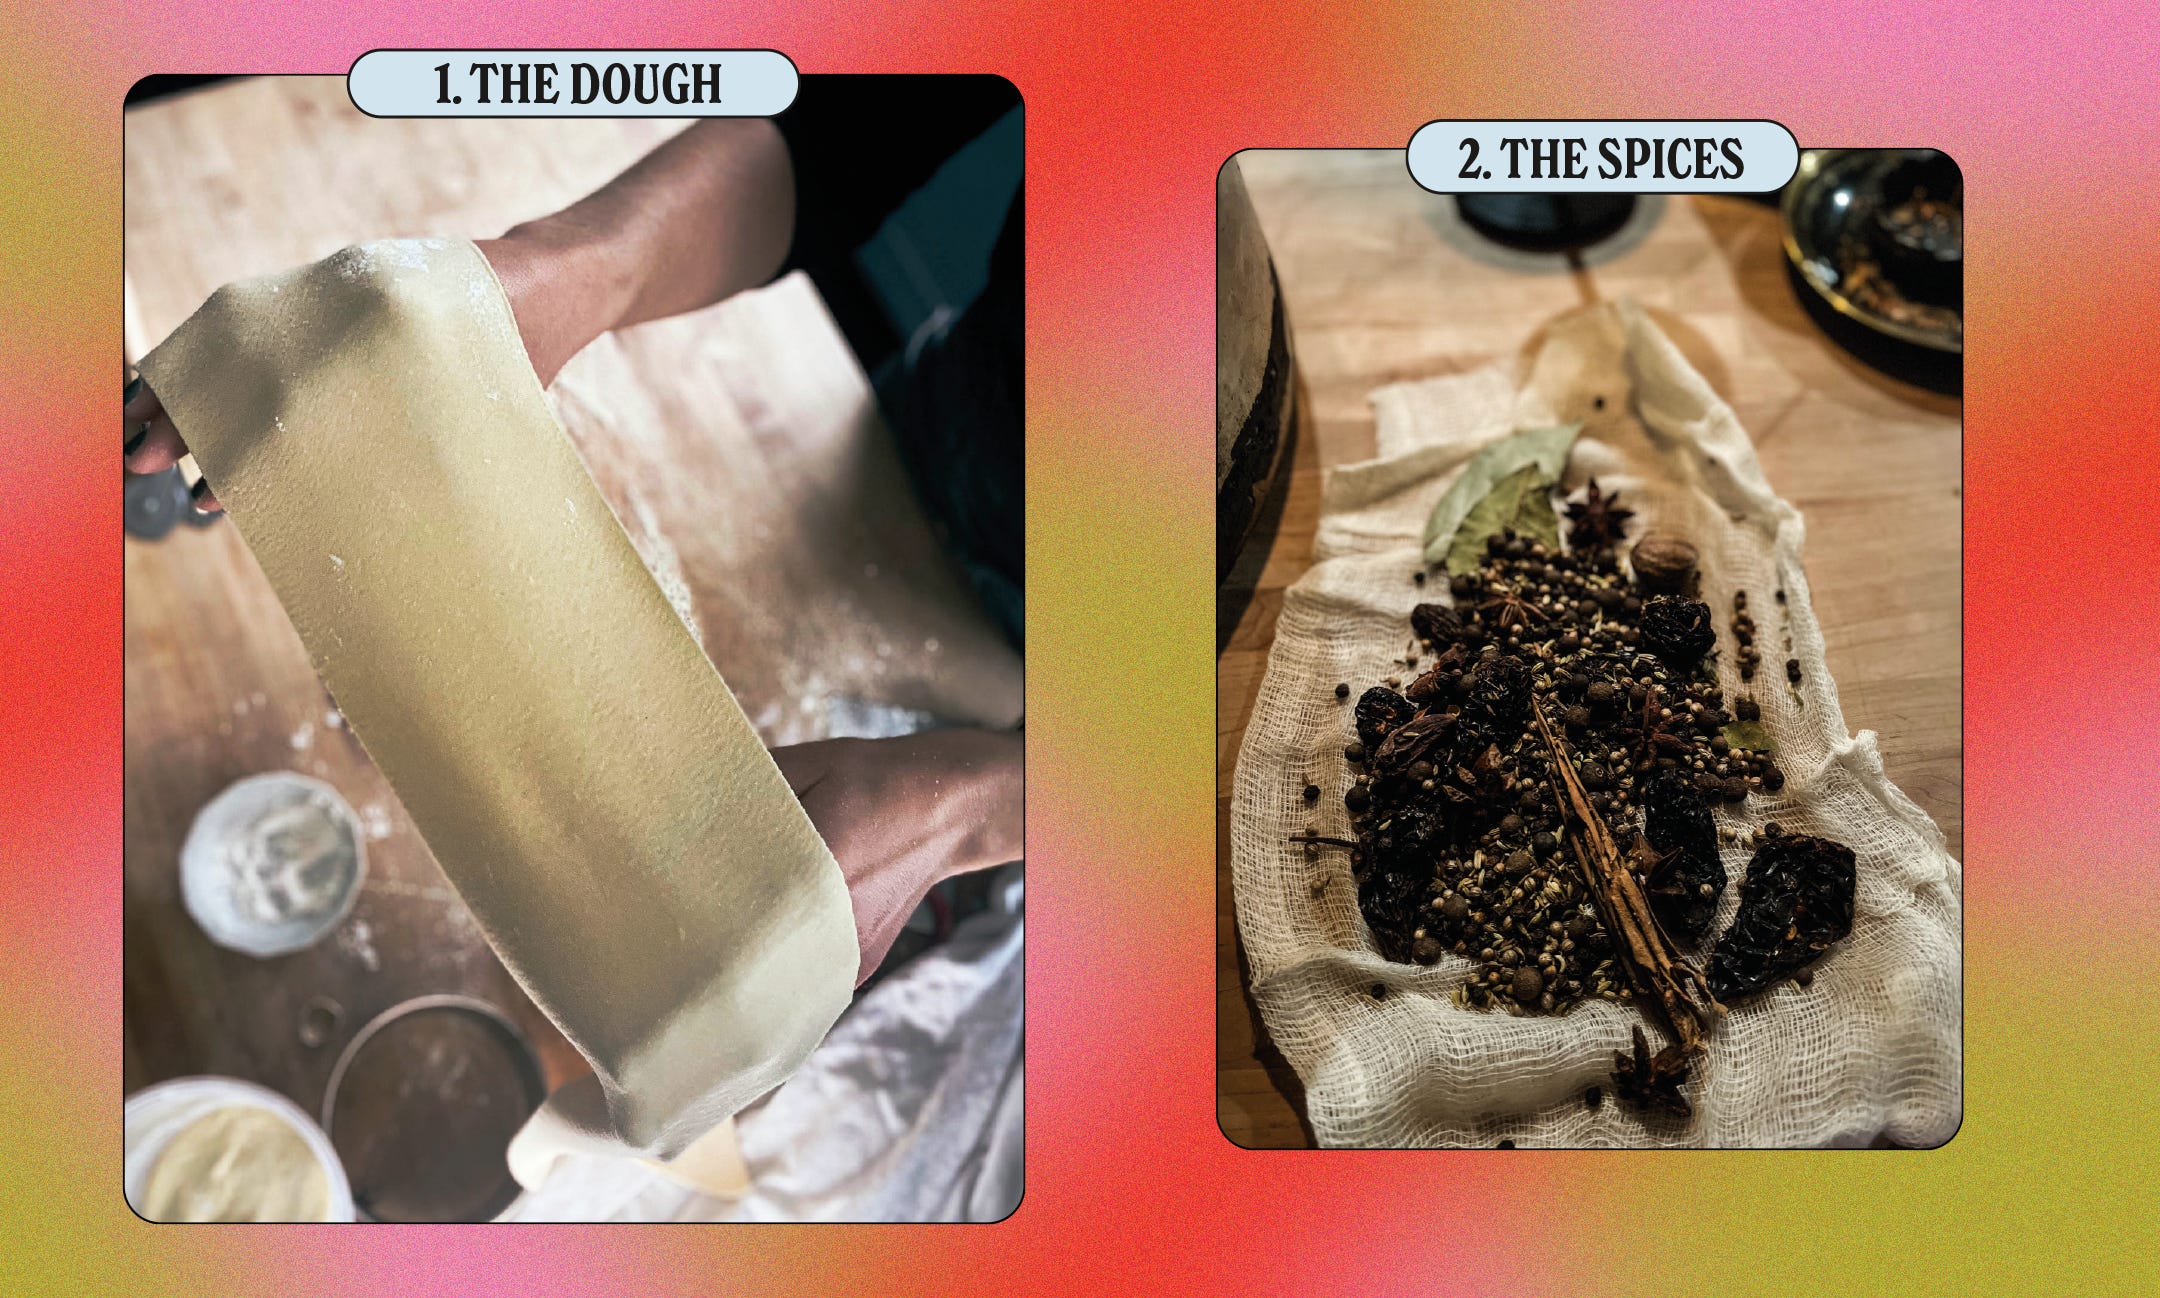 On the left, an image of dumpling dough being stretched; on the right, a bundle of spices in cheesecloth on a counter